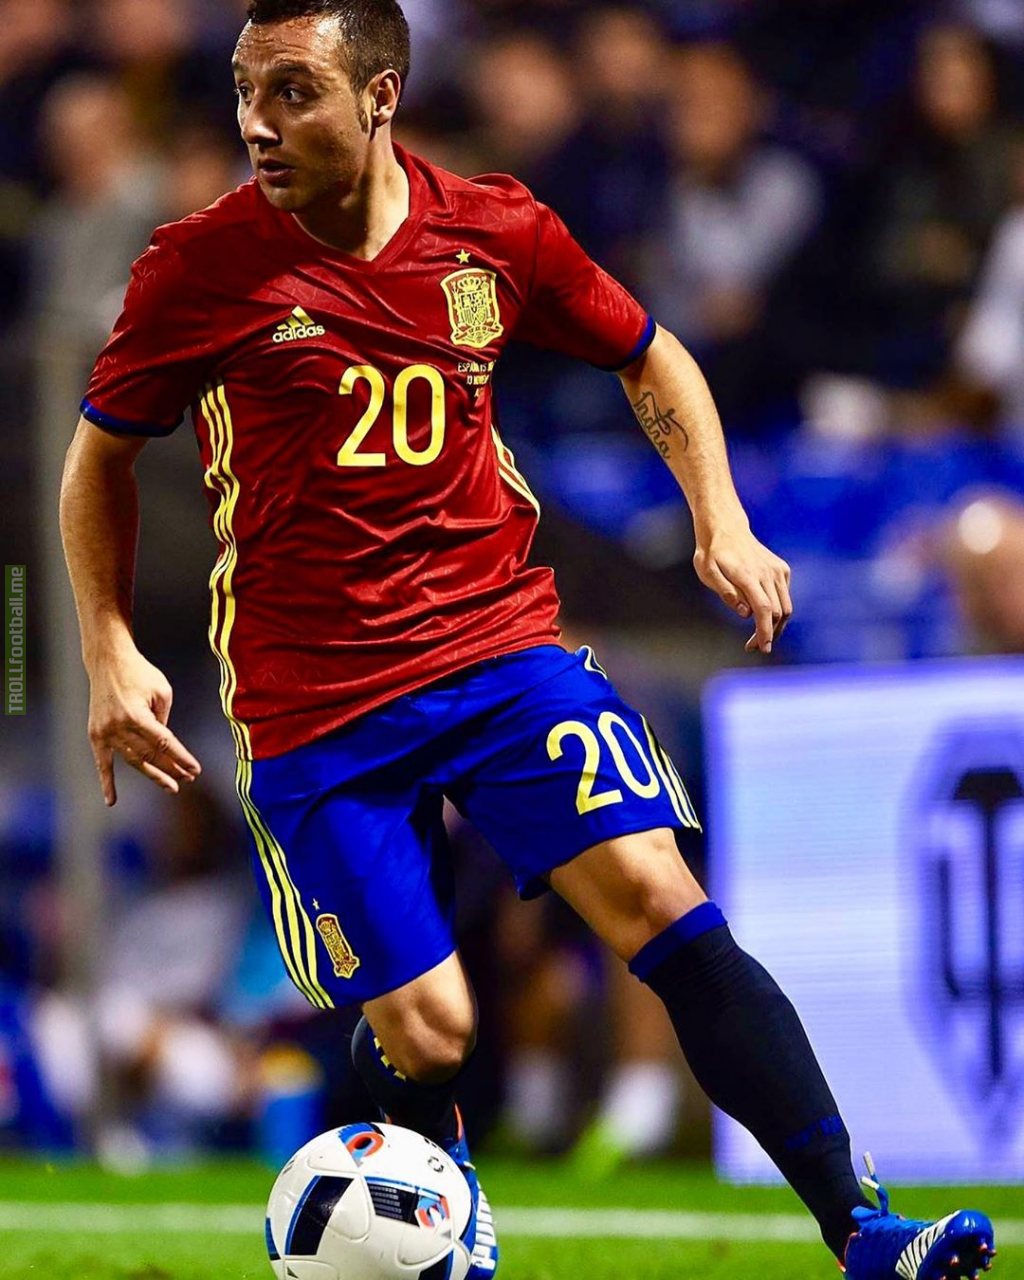 Santi Cazorla has been selected for the Spain national team squad.